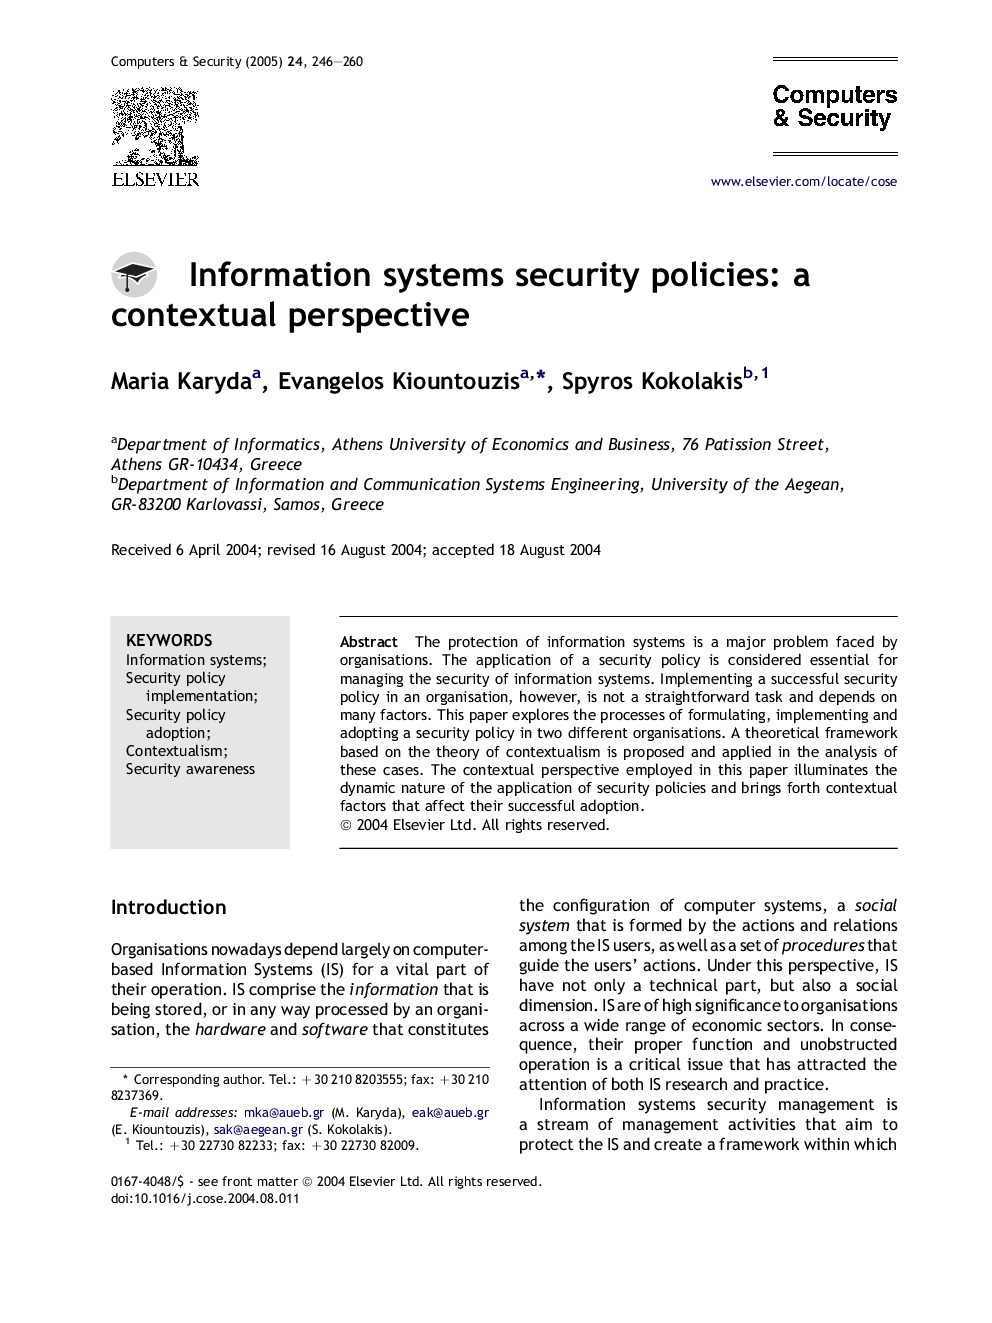 Information systems security policies: a contextual perspective